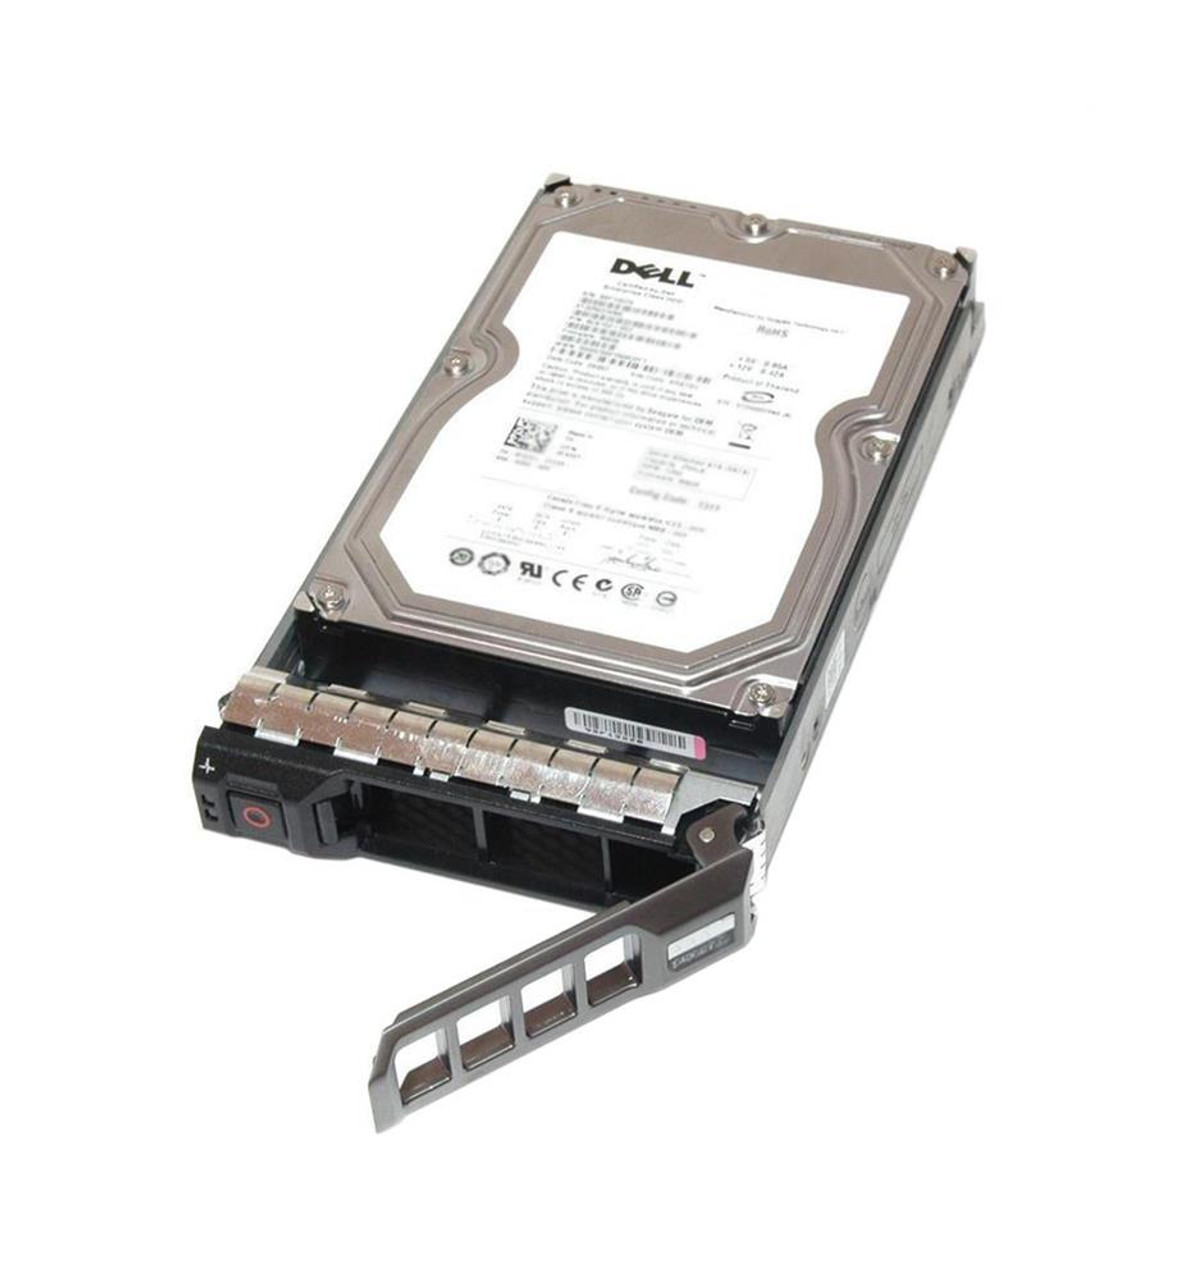 0CGMFR Dell 10TB 7200RPM SAS 12Gbps Nearline Hot Swap (512e) 3.5-inch Internal Hard Drive with Tray